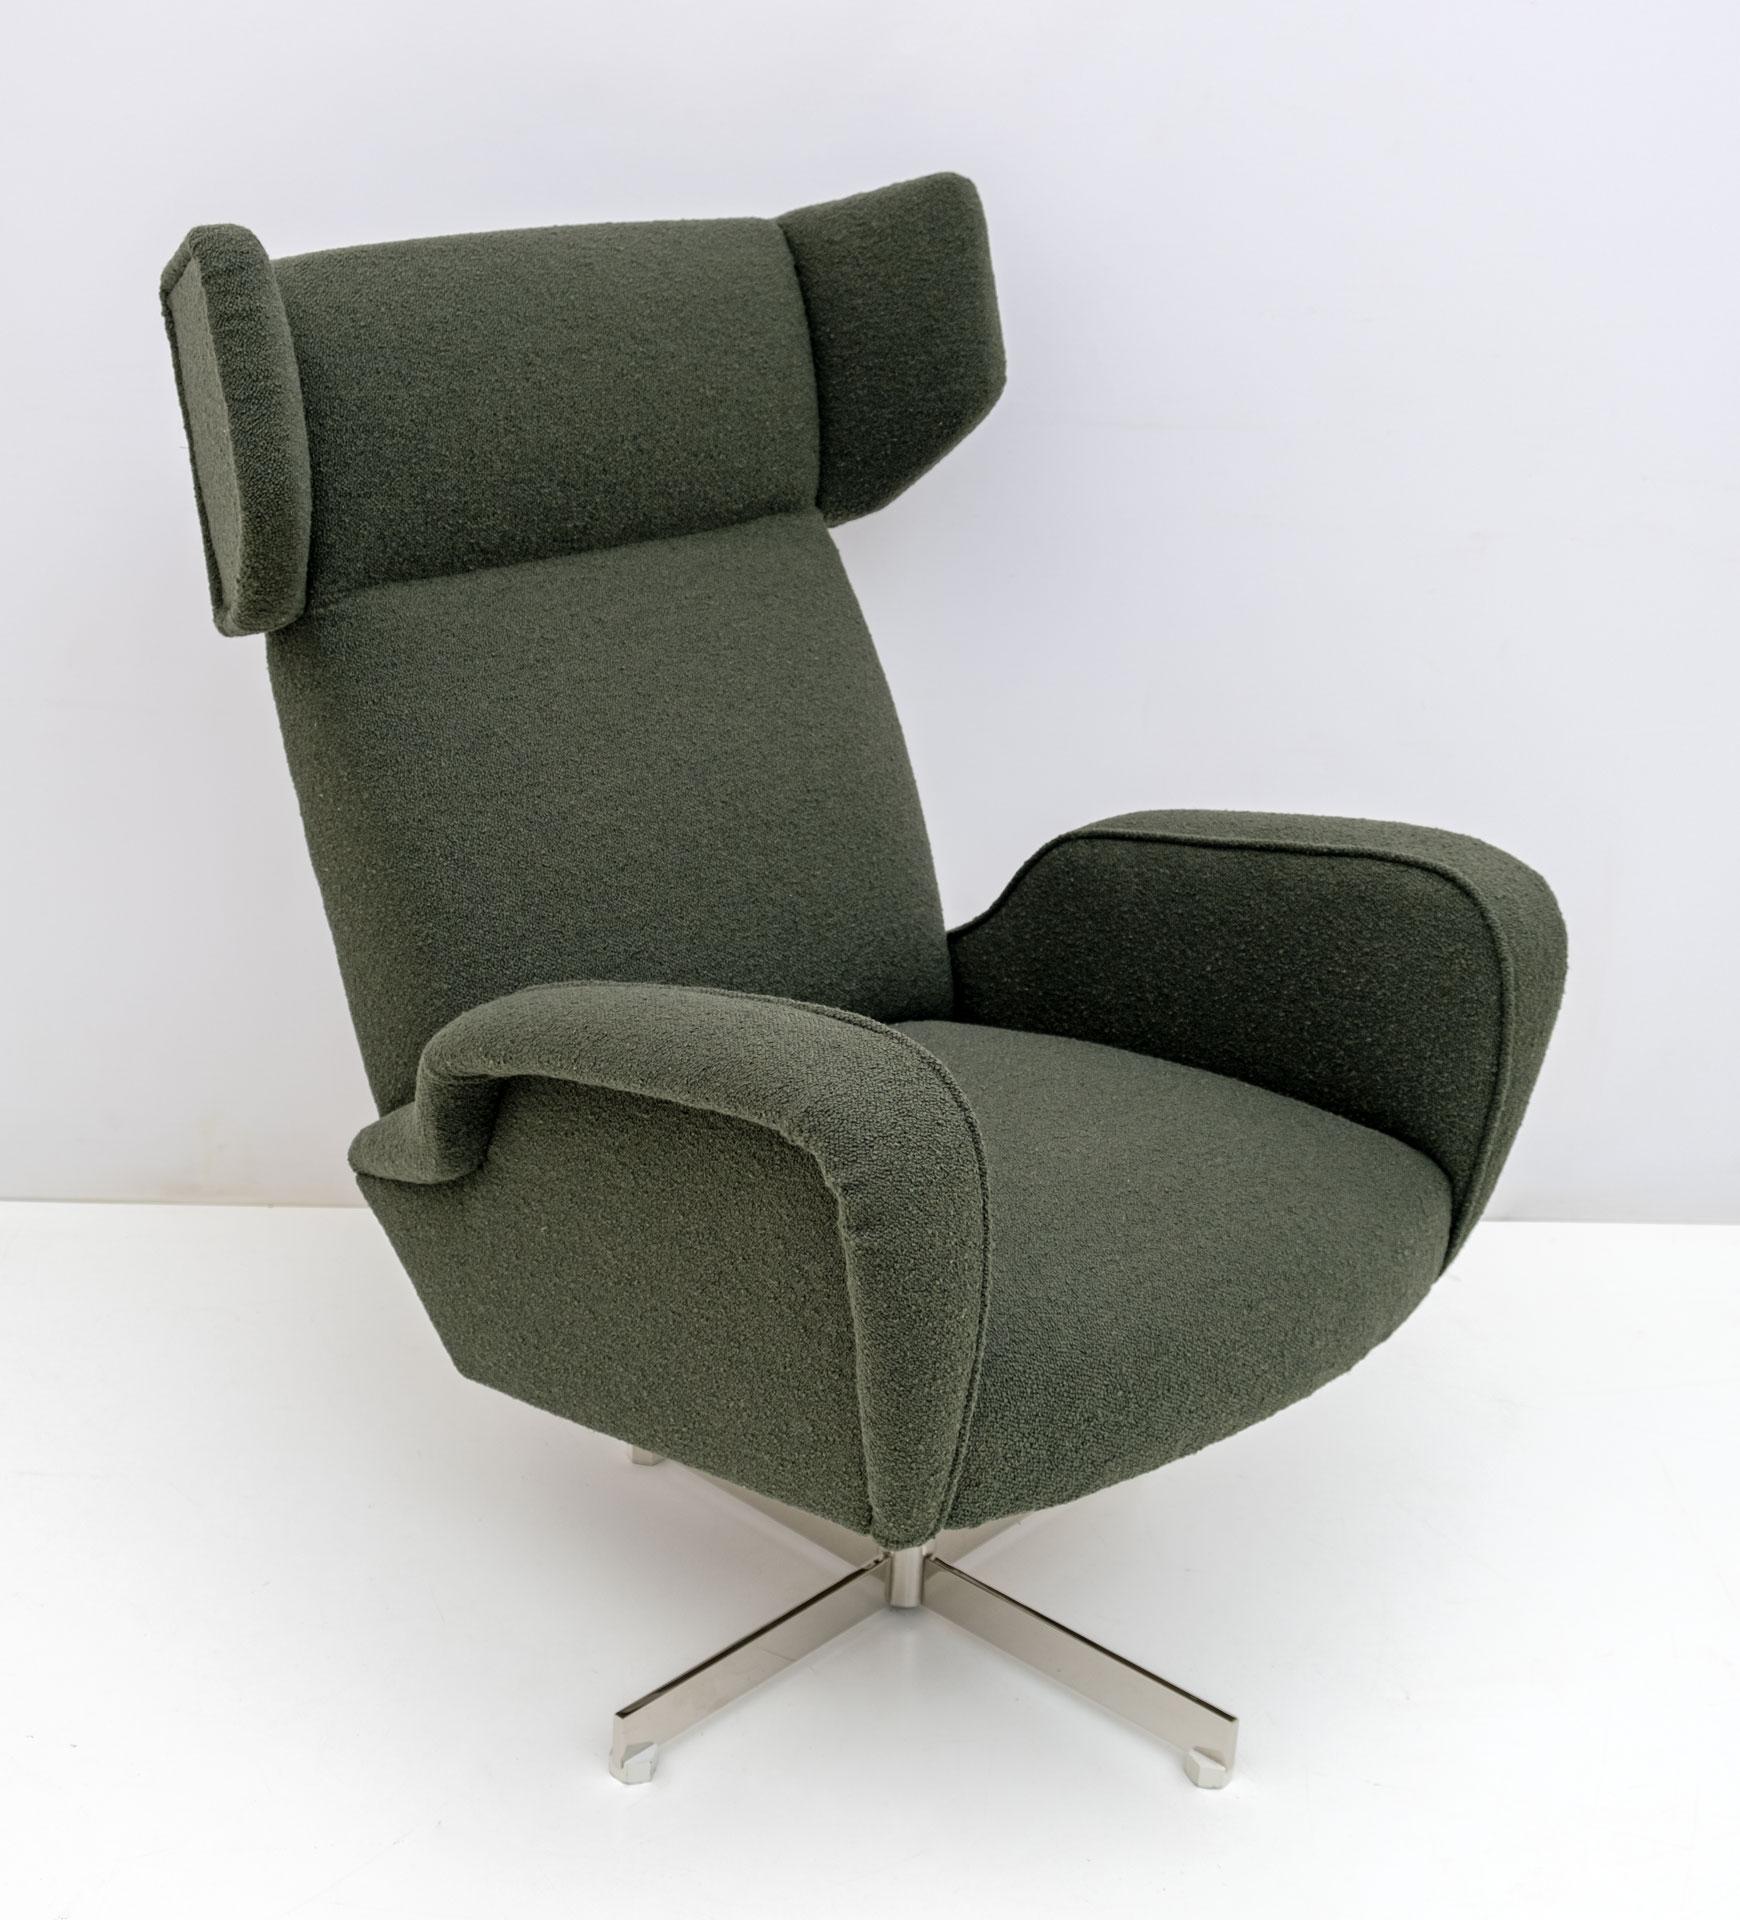 This armchair was produced in Italy in the 70s, it is swivel and rocking, with a high backrest, steel base. The armchair has been restored and has a new green Bouclè upholstery.